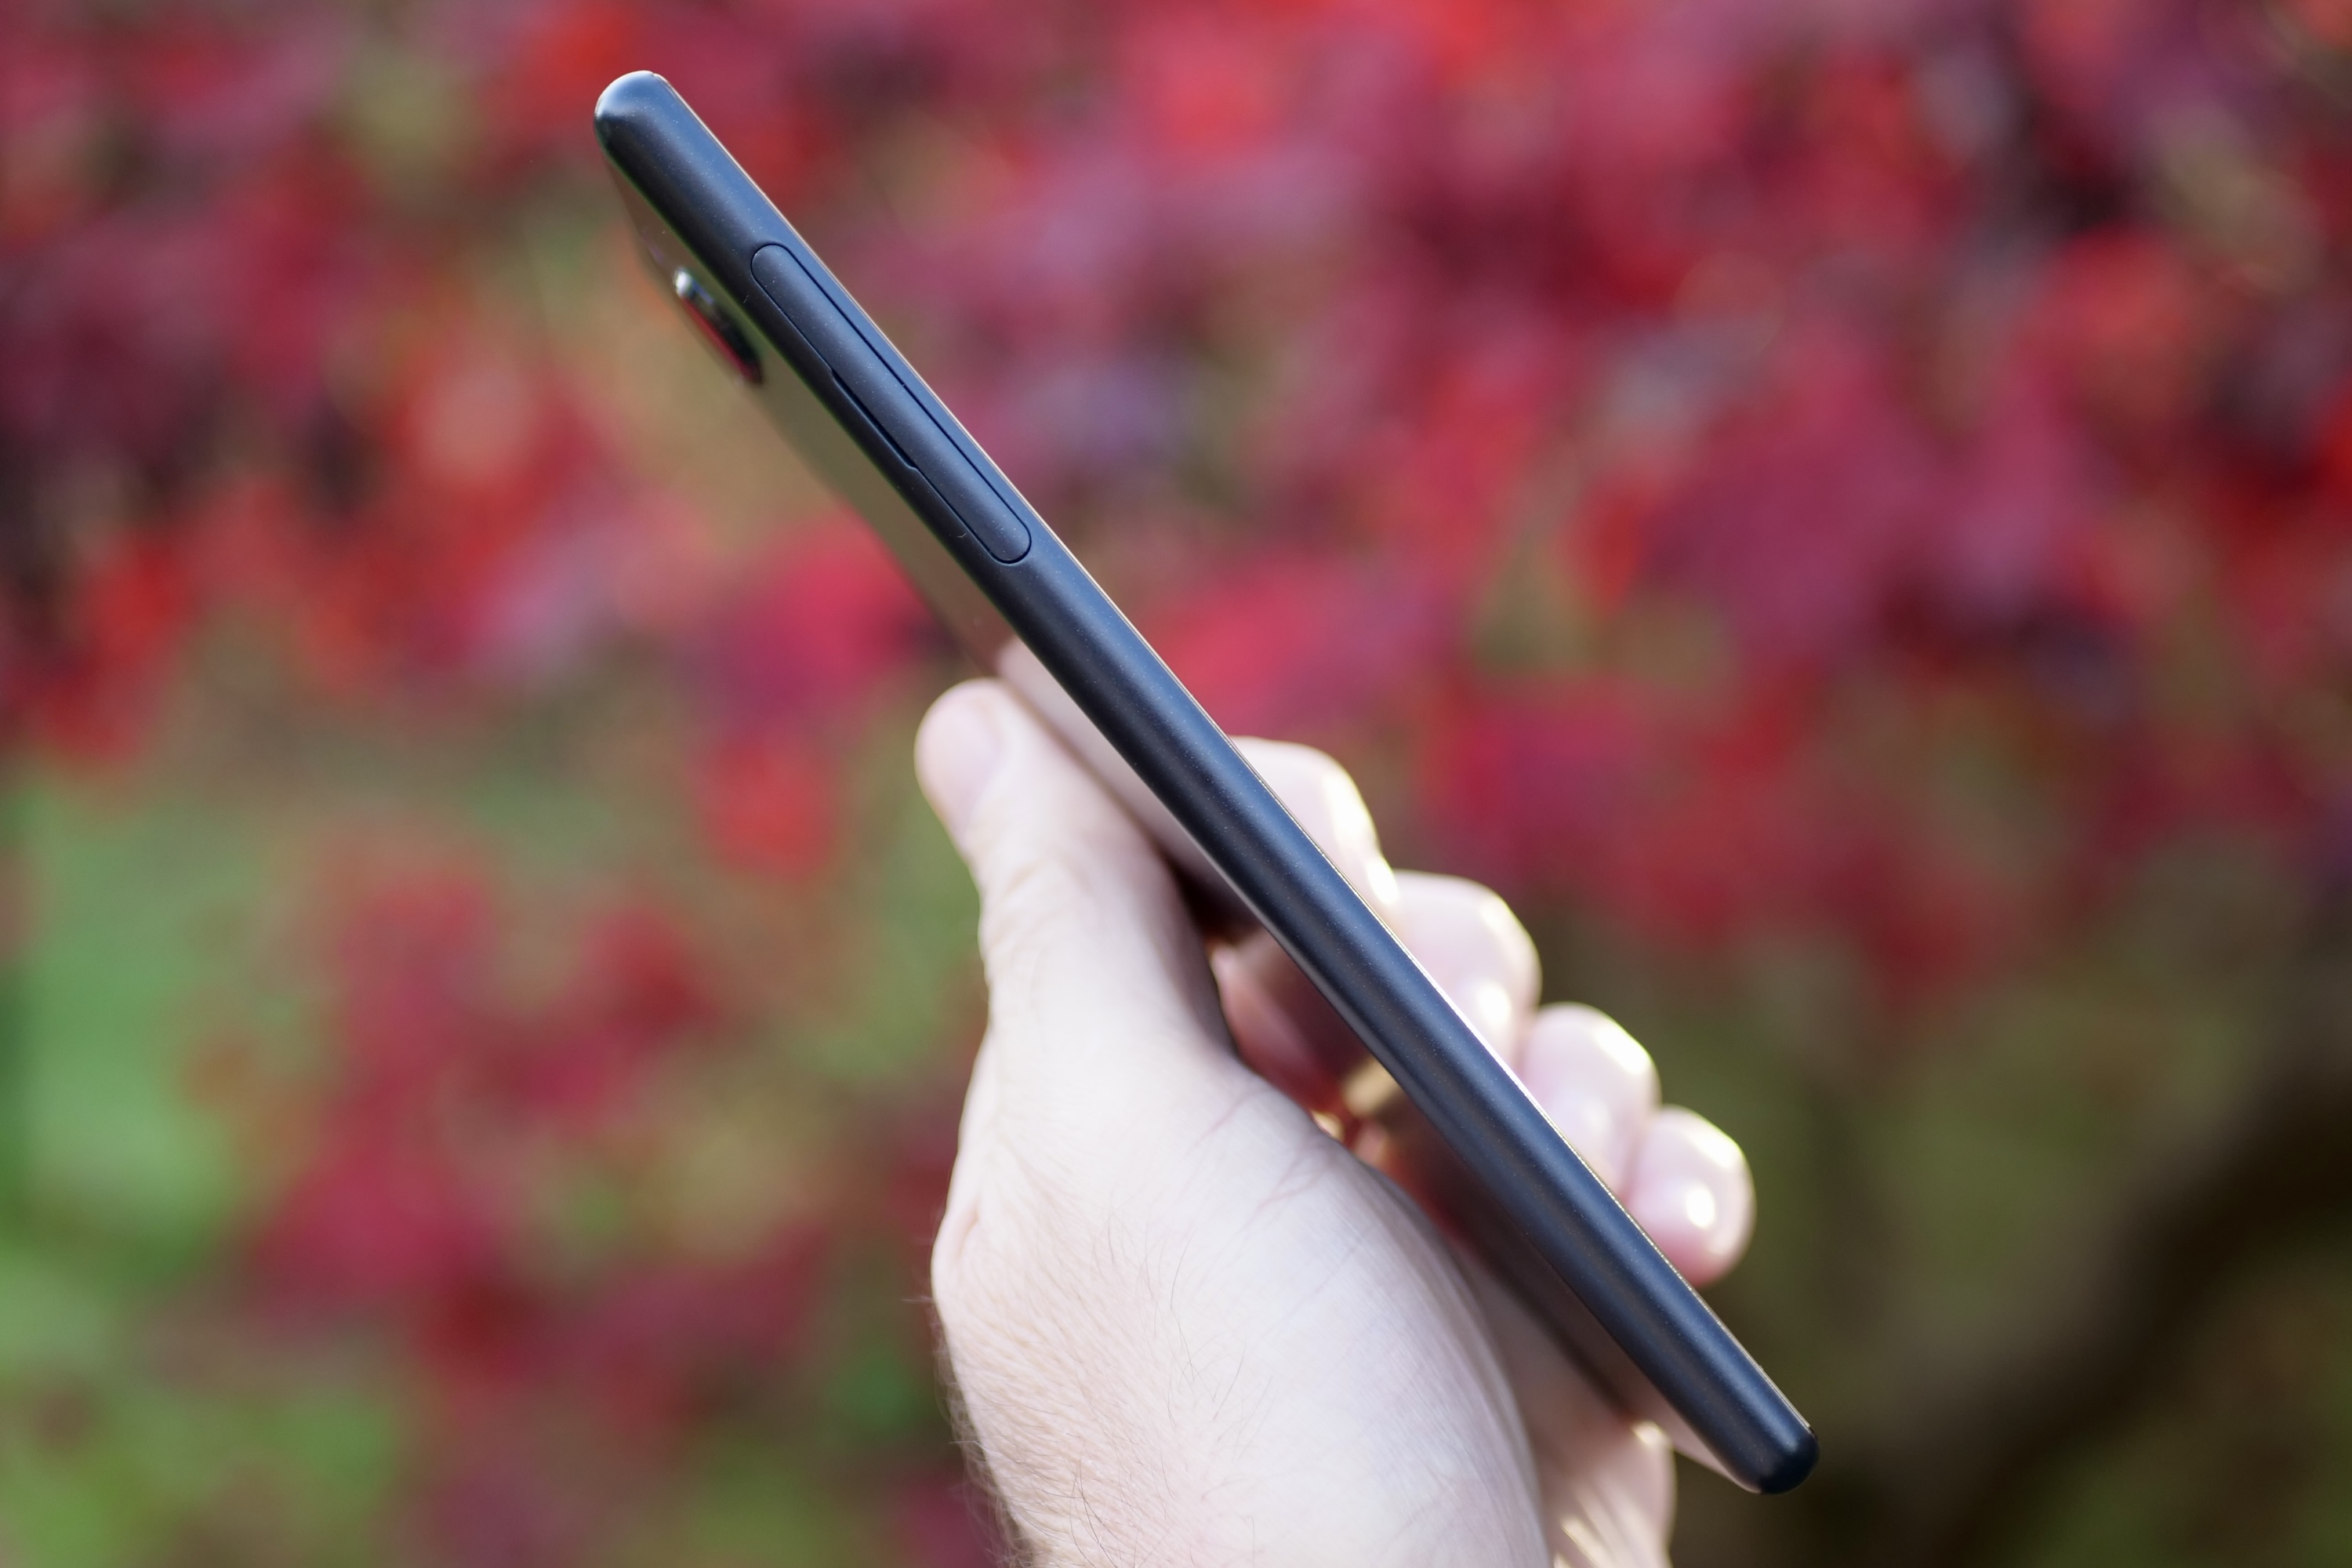 A person holding the Sony Xperia 10 Plus, showing the side of the phone.